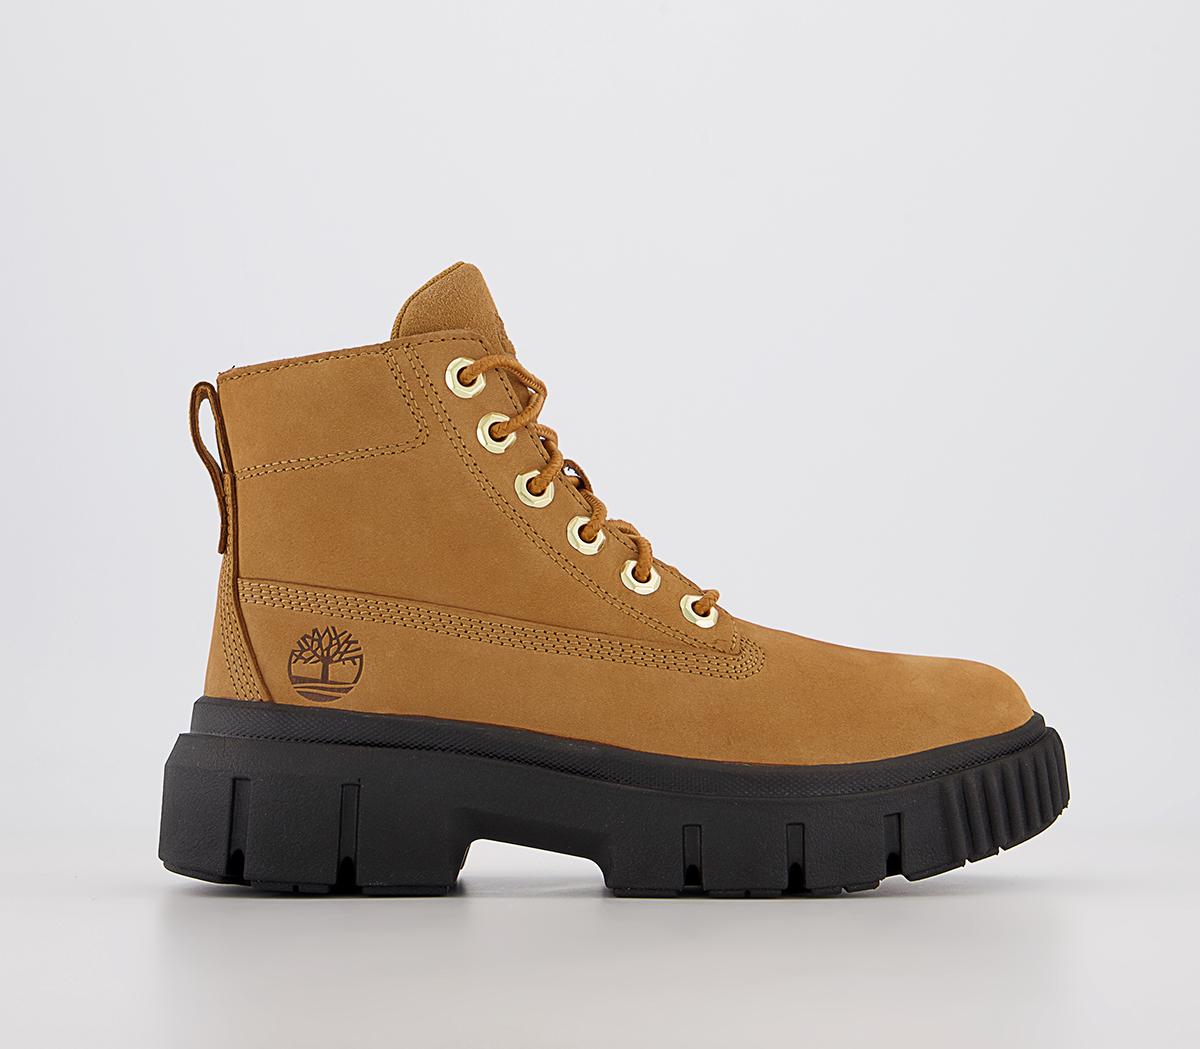 Timberland Greyfield Boots Wheat - Women's Ankle Boots